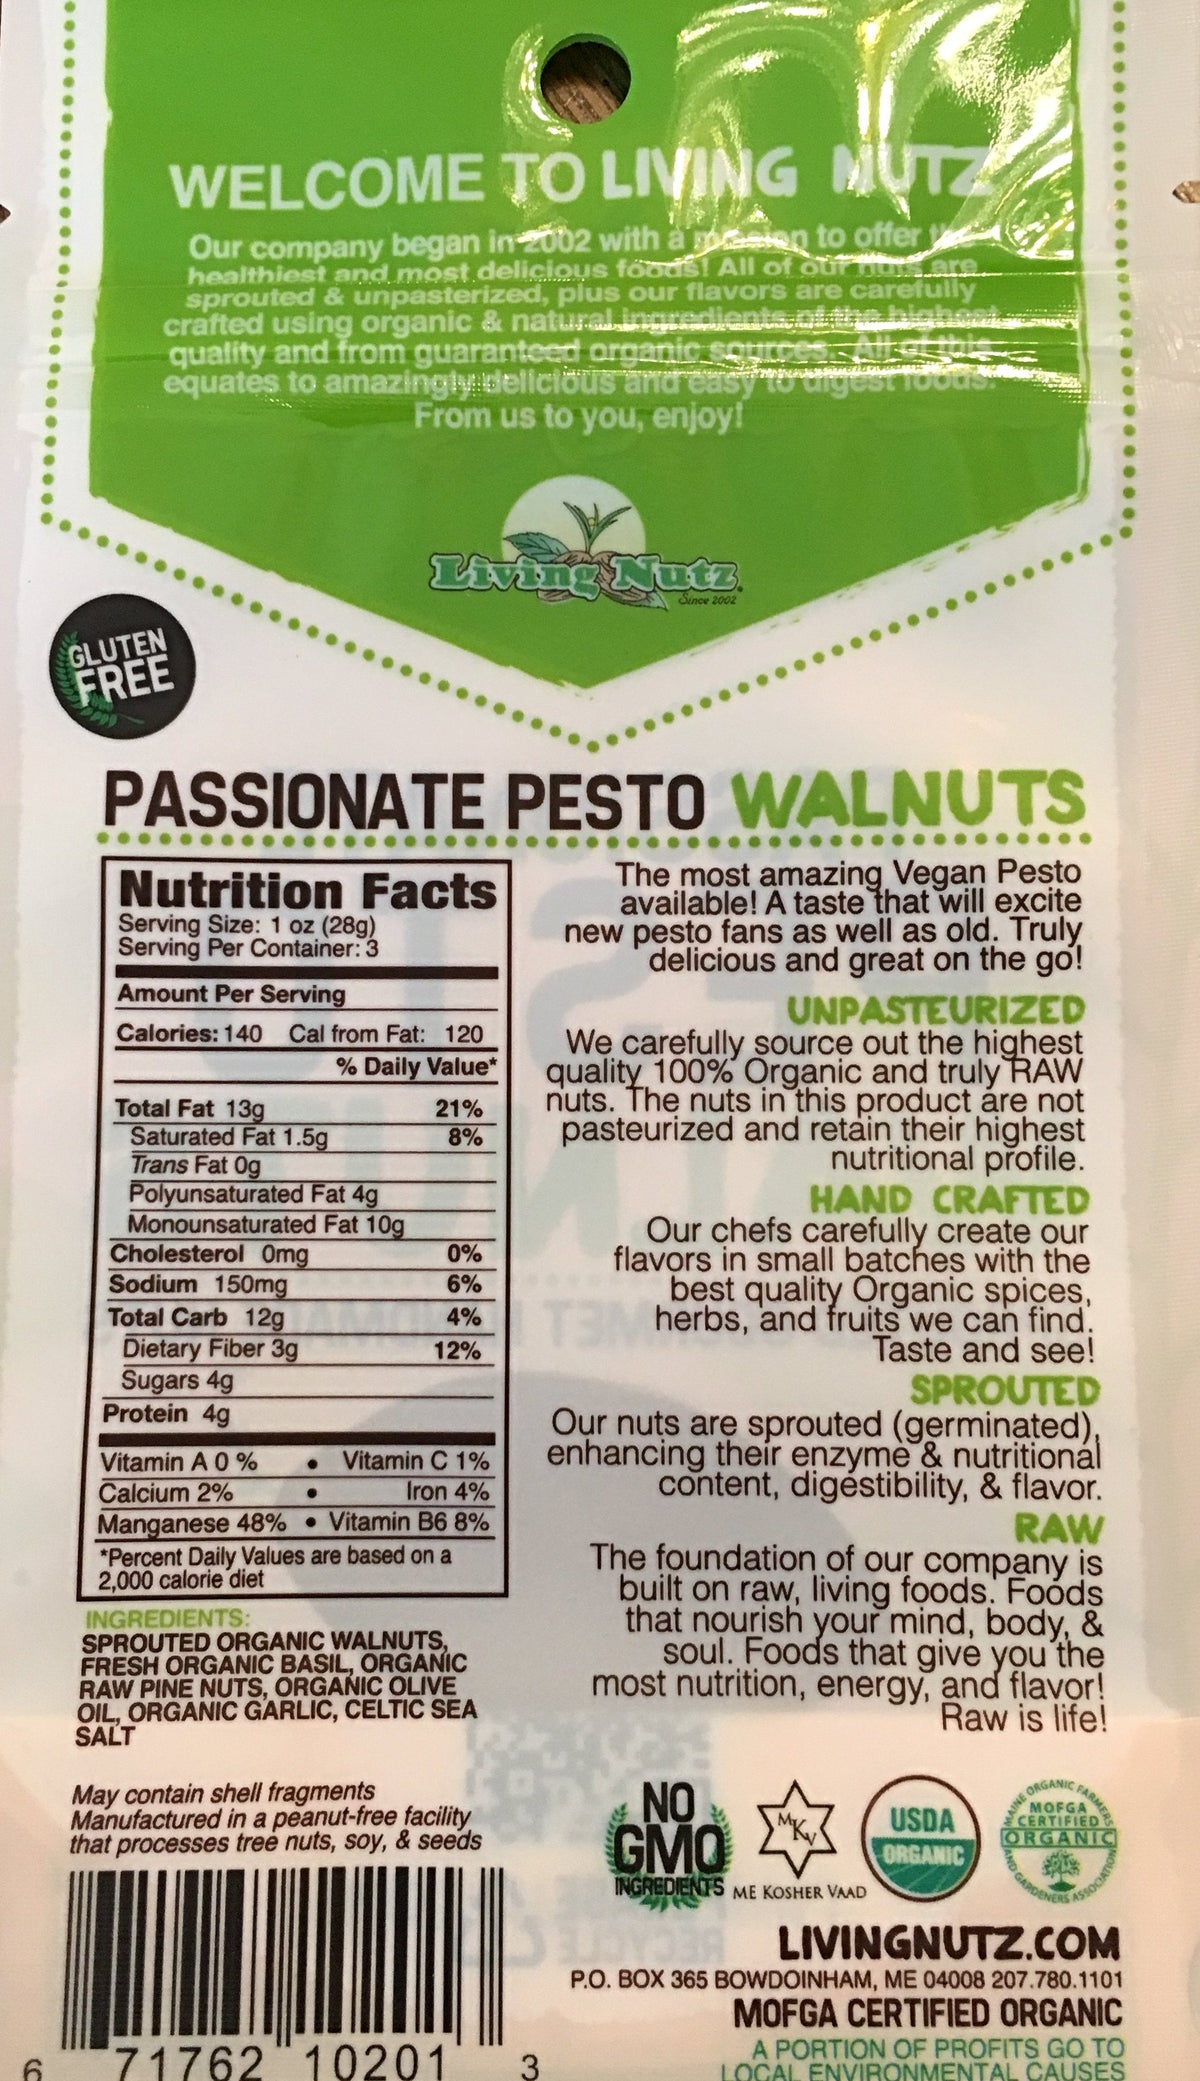 Sprouted nuts. Organic flavored raw walnuts &amp; pesto. Healthy nut snacks. Living nuts.